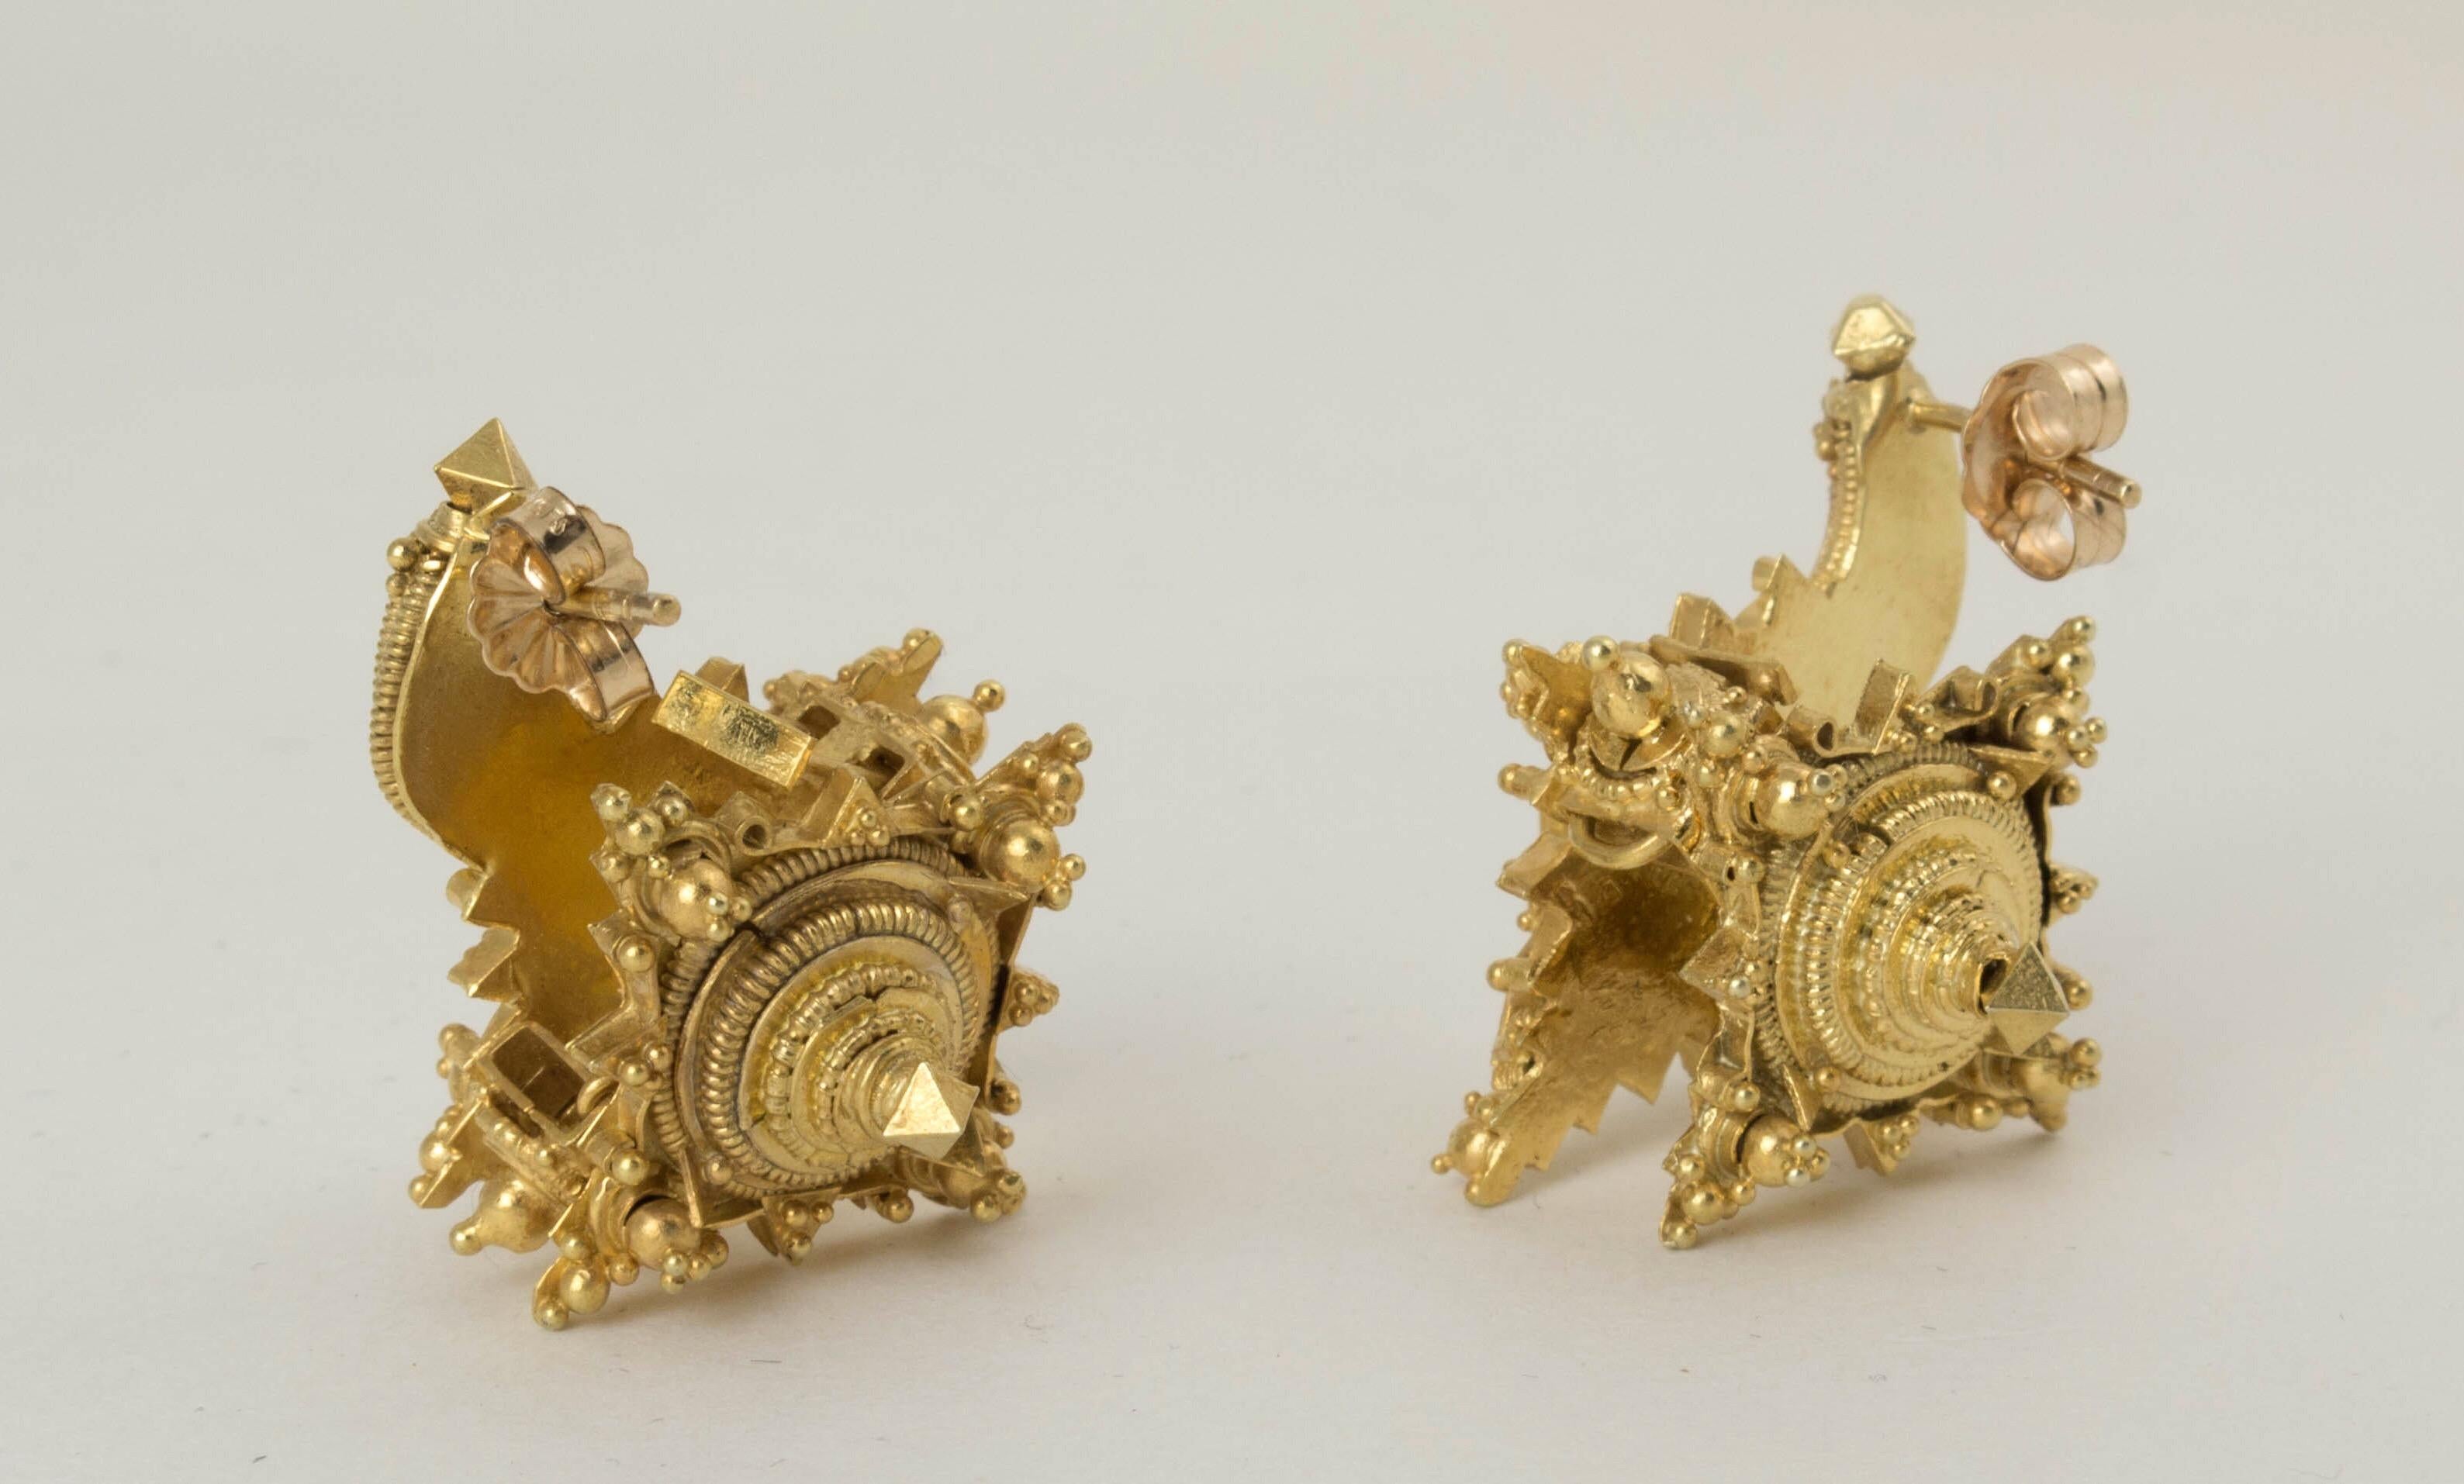 Antique Javanese 22k Gold Conch Shaped Earrings, 10th-15th Century, Indonesia In Good Condition For Sale In Austin, TX